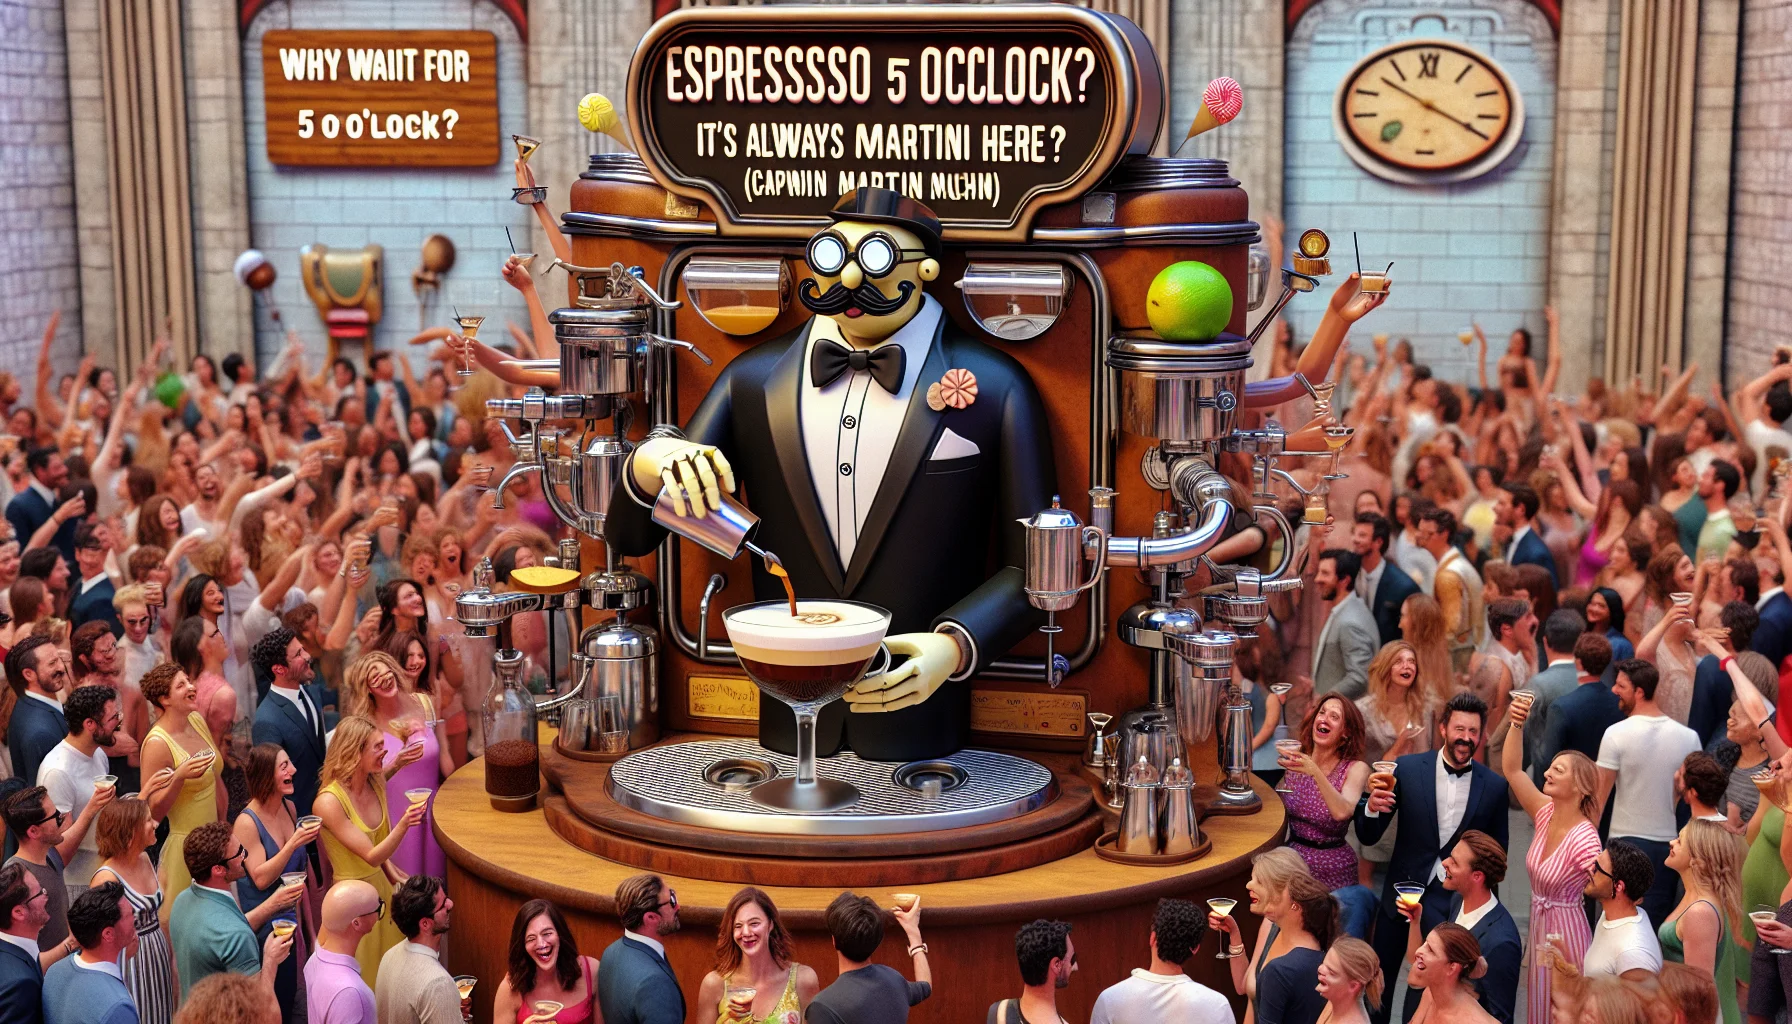 Imagine a humorous scene featuring an Espresso Martini machine. The machine is designed like a charming mechanical bartender situated in a lively party atmosphere. The machine is in the process of skillfully mixing an Espresso Martini cocktail, much to the amusement of the surrounding crowd. The machine is adorned with comical decorations enhancing its charisma, such as an oversized top hat and a handlebar mustache. A sign nearby humorously invites people to indulge saying, 'Why wait for 5 o'clock? It's always martini time here!'. The crowd present is filled with a diverse group of people of various descents and genders, each holding a delightful Espresso Martini, cheerfully enjoying the party.